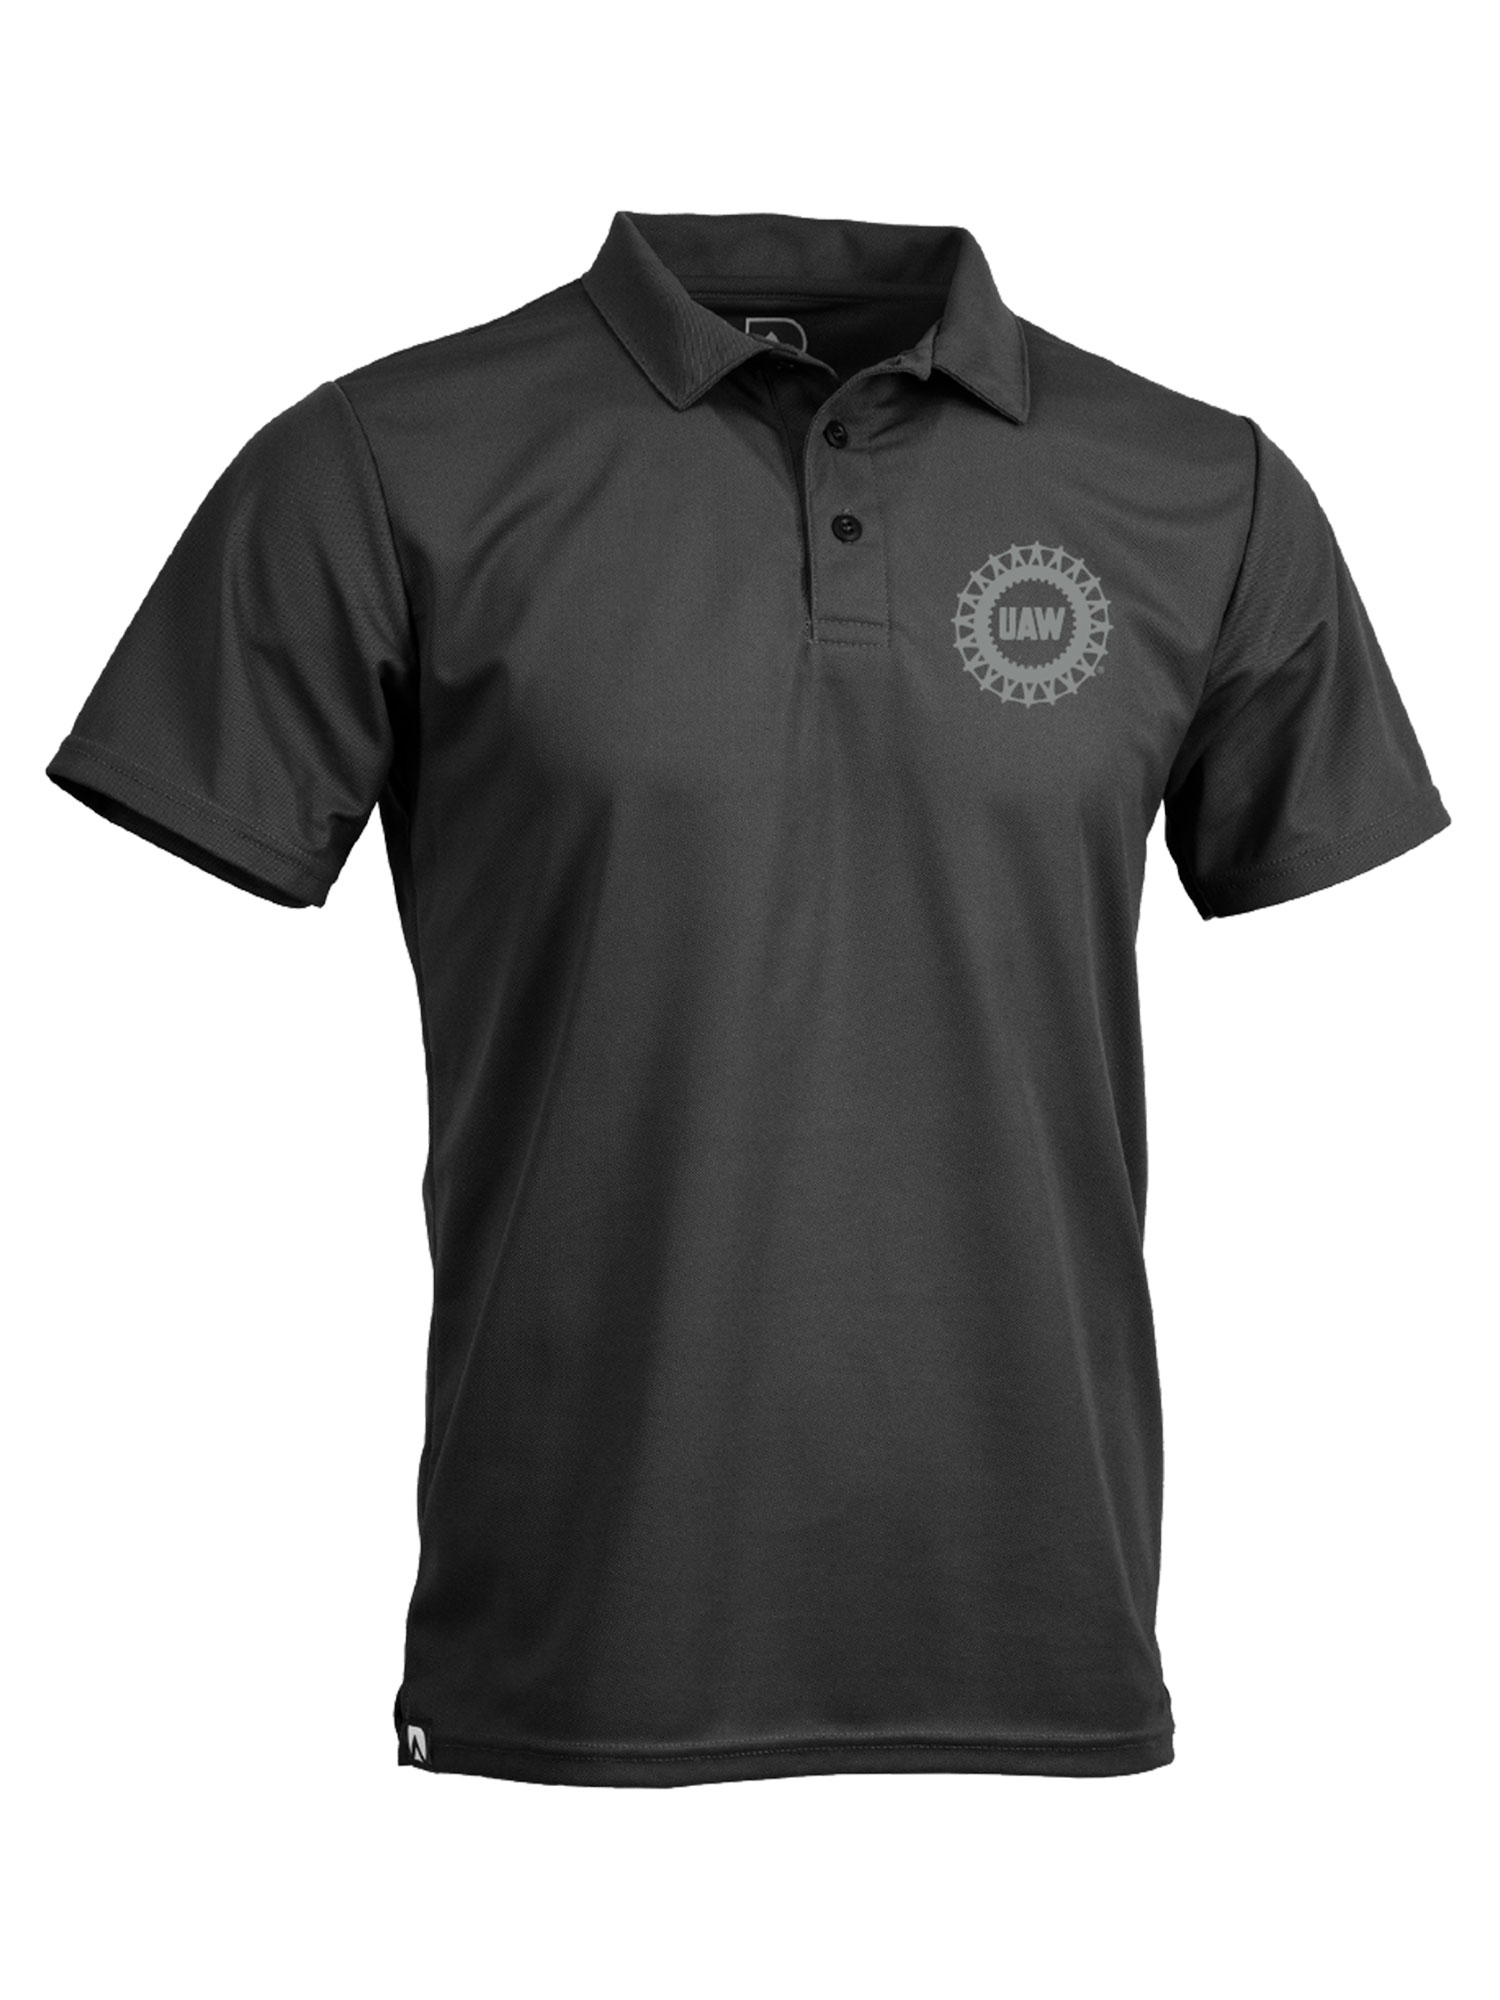 Performance Polo - Union-Made & Decorated